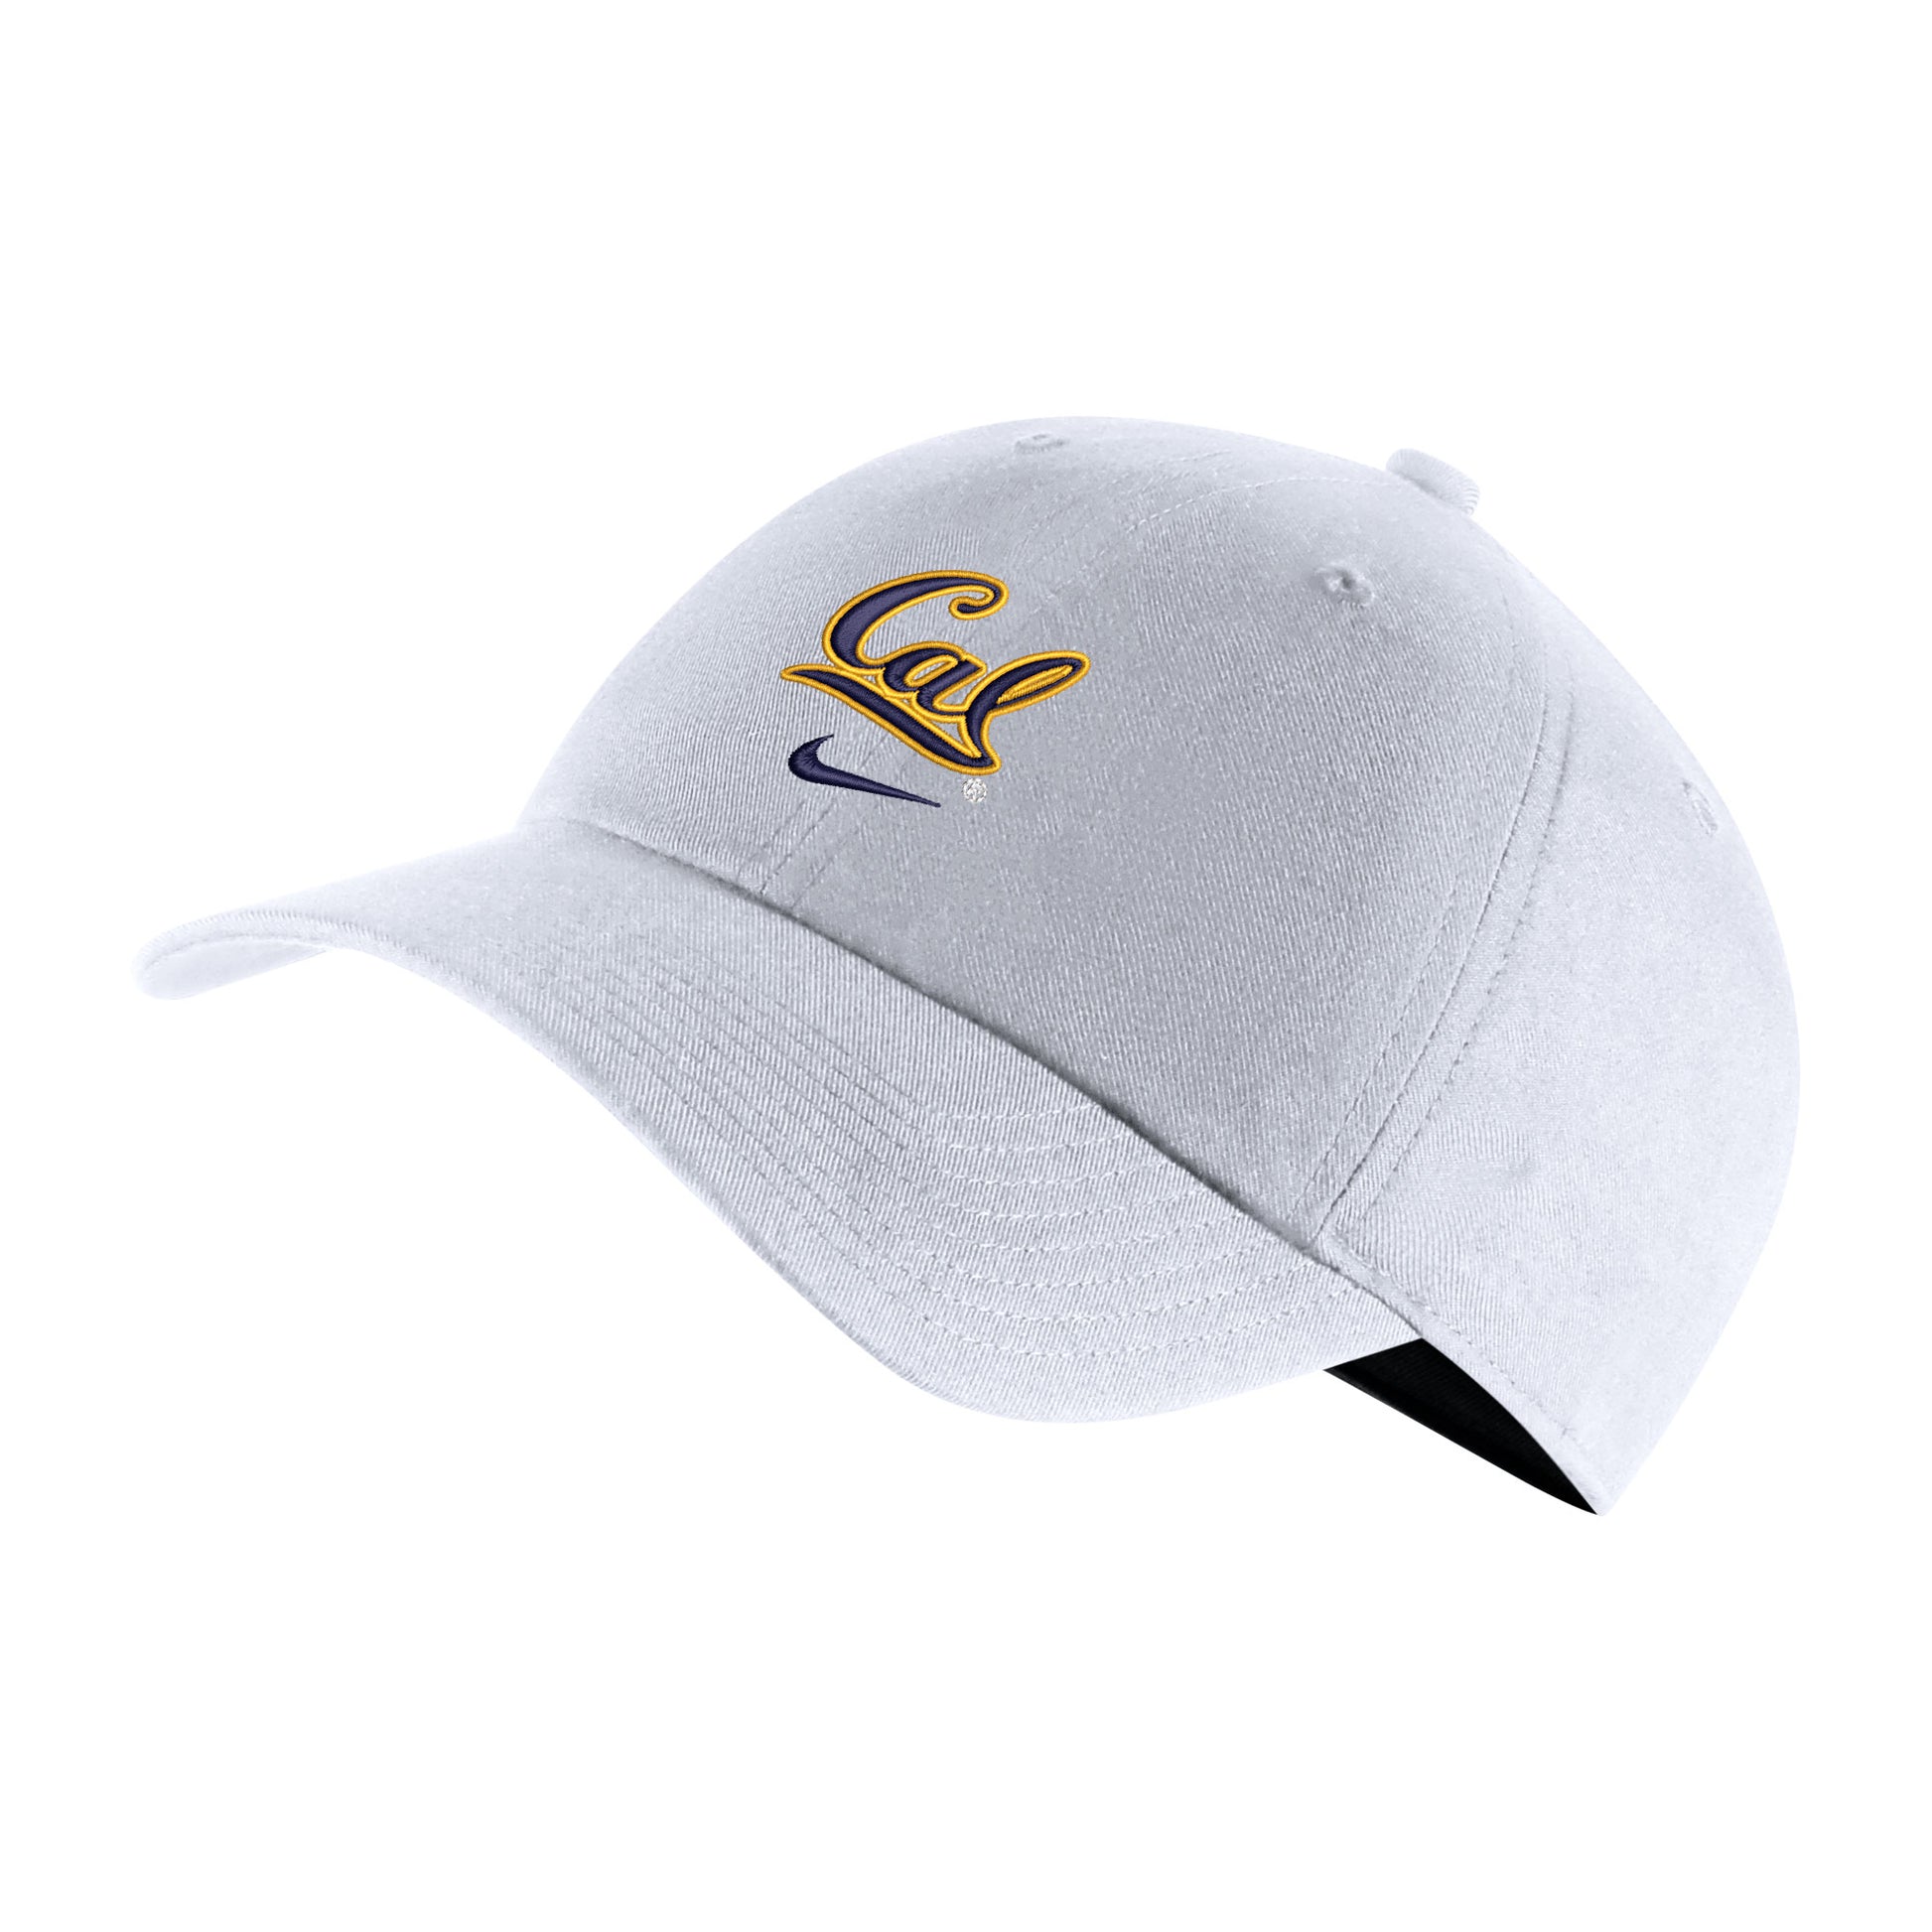 U.C. Berkeley two color Cal embroidered & Nike swoosh campus hat-White-Shop College Wear